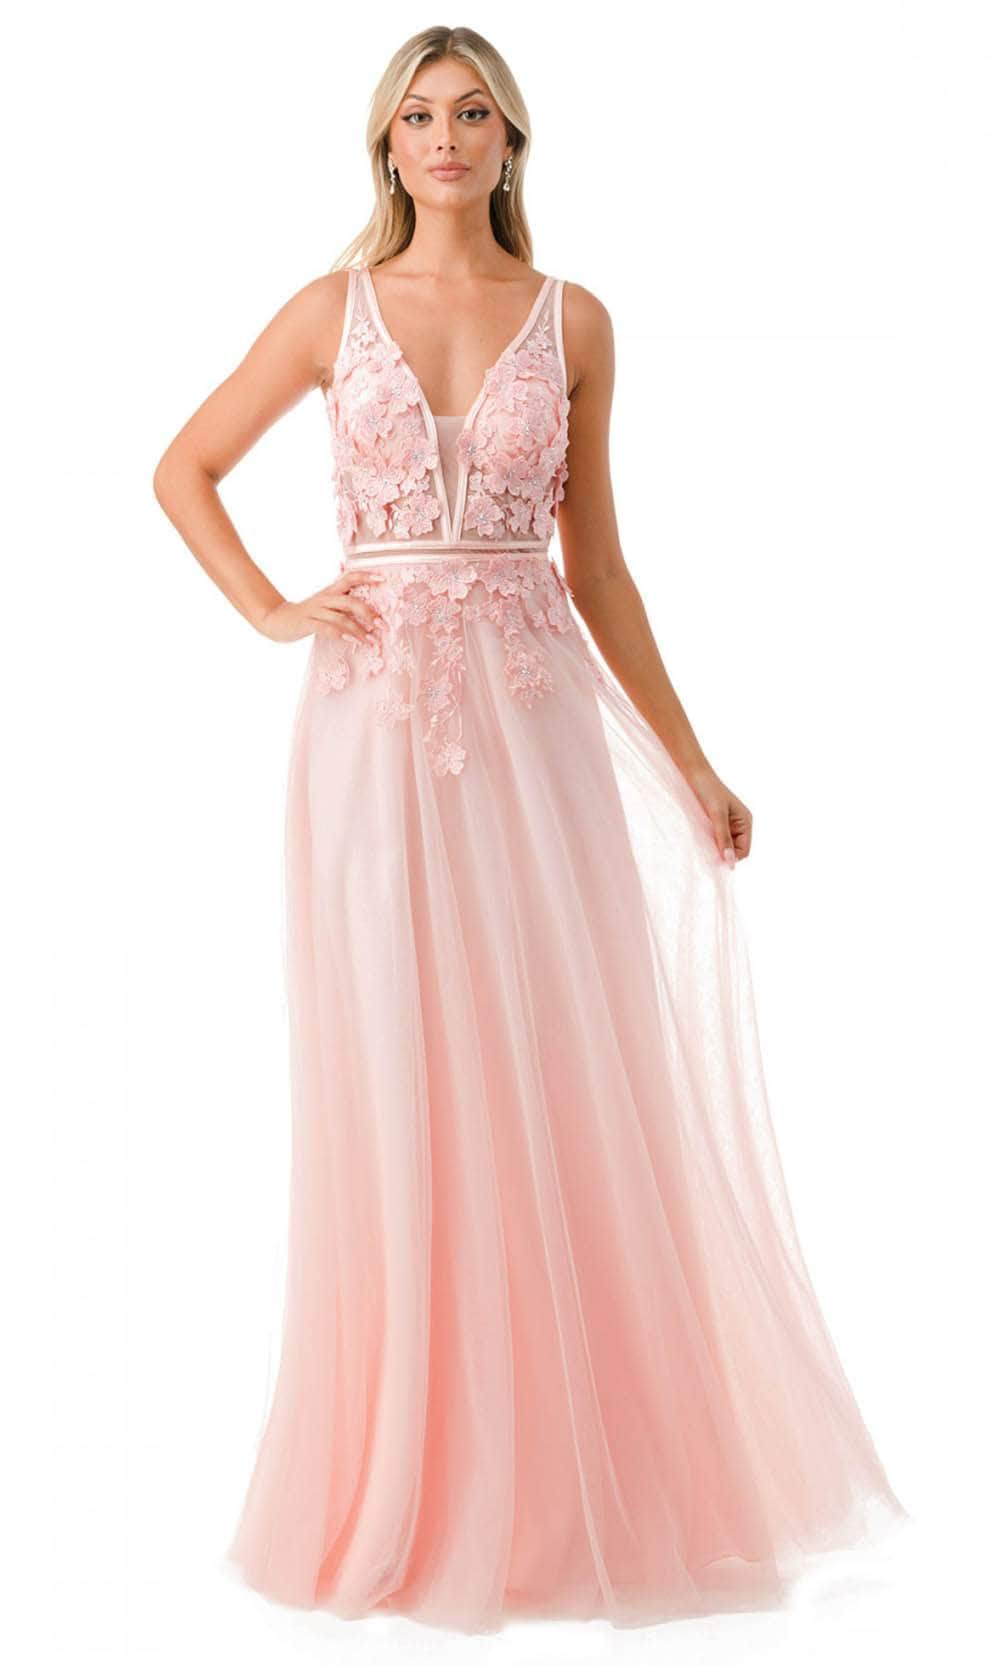 Image of Aspeed Design P2114 - Floral Appliqued A-Line Prom Gown